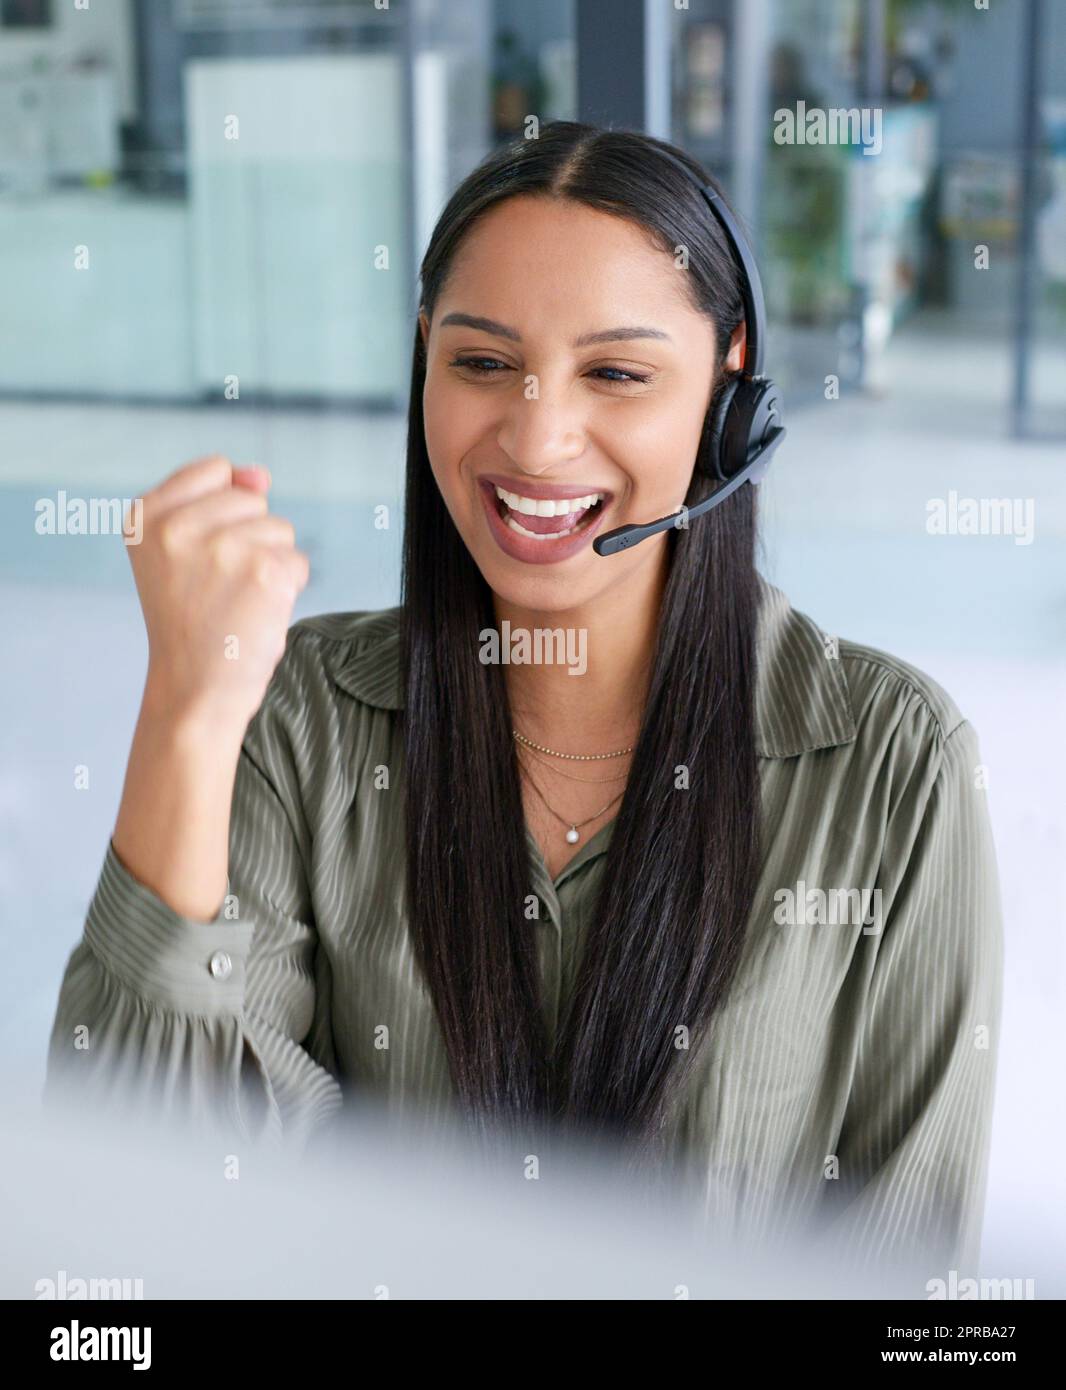 Big sales means bagging a big commission. a young call centre agent cheering while working in an office. Stock Photo